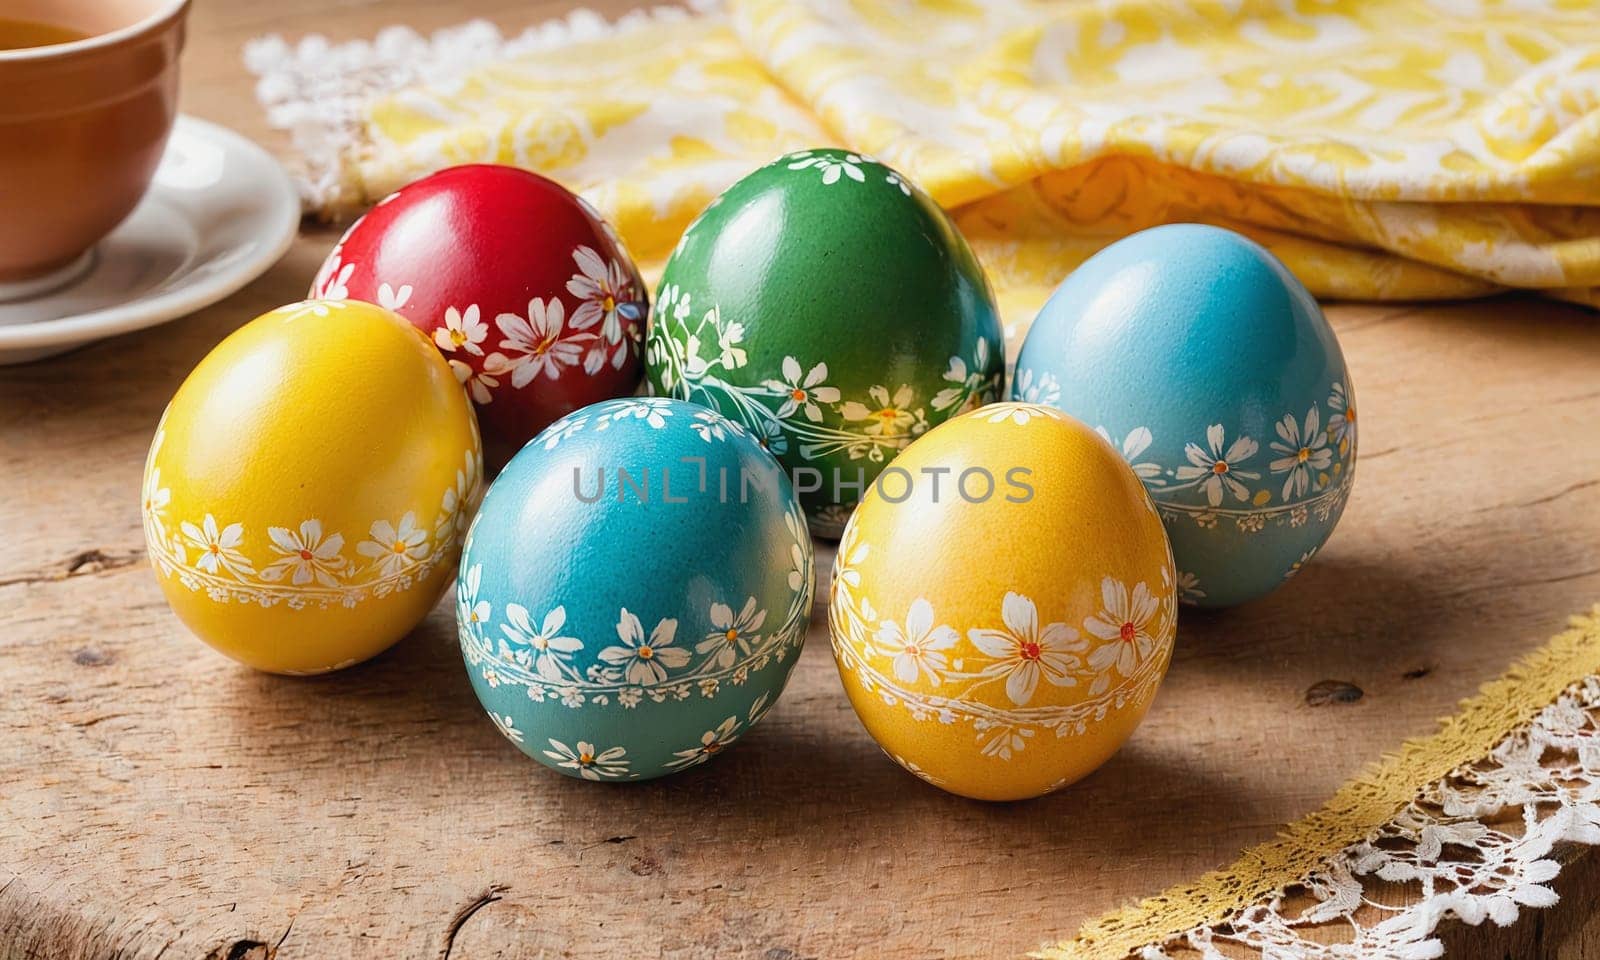 Hand-painted Easter eggs on a floral linen background, reflecting the warmth and tradition of the Easter holiday.